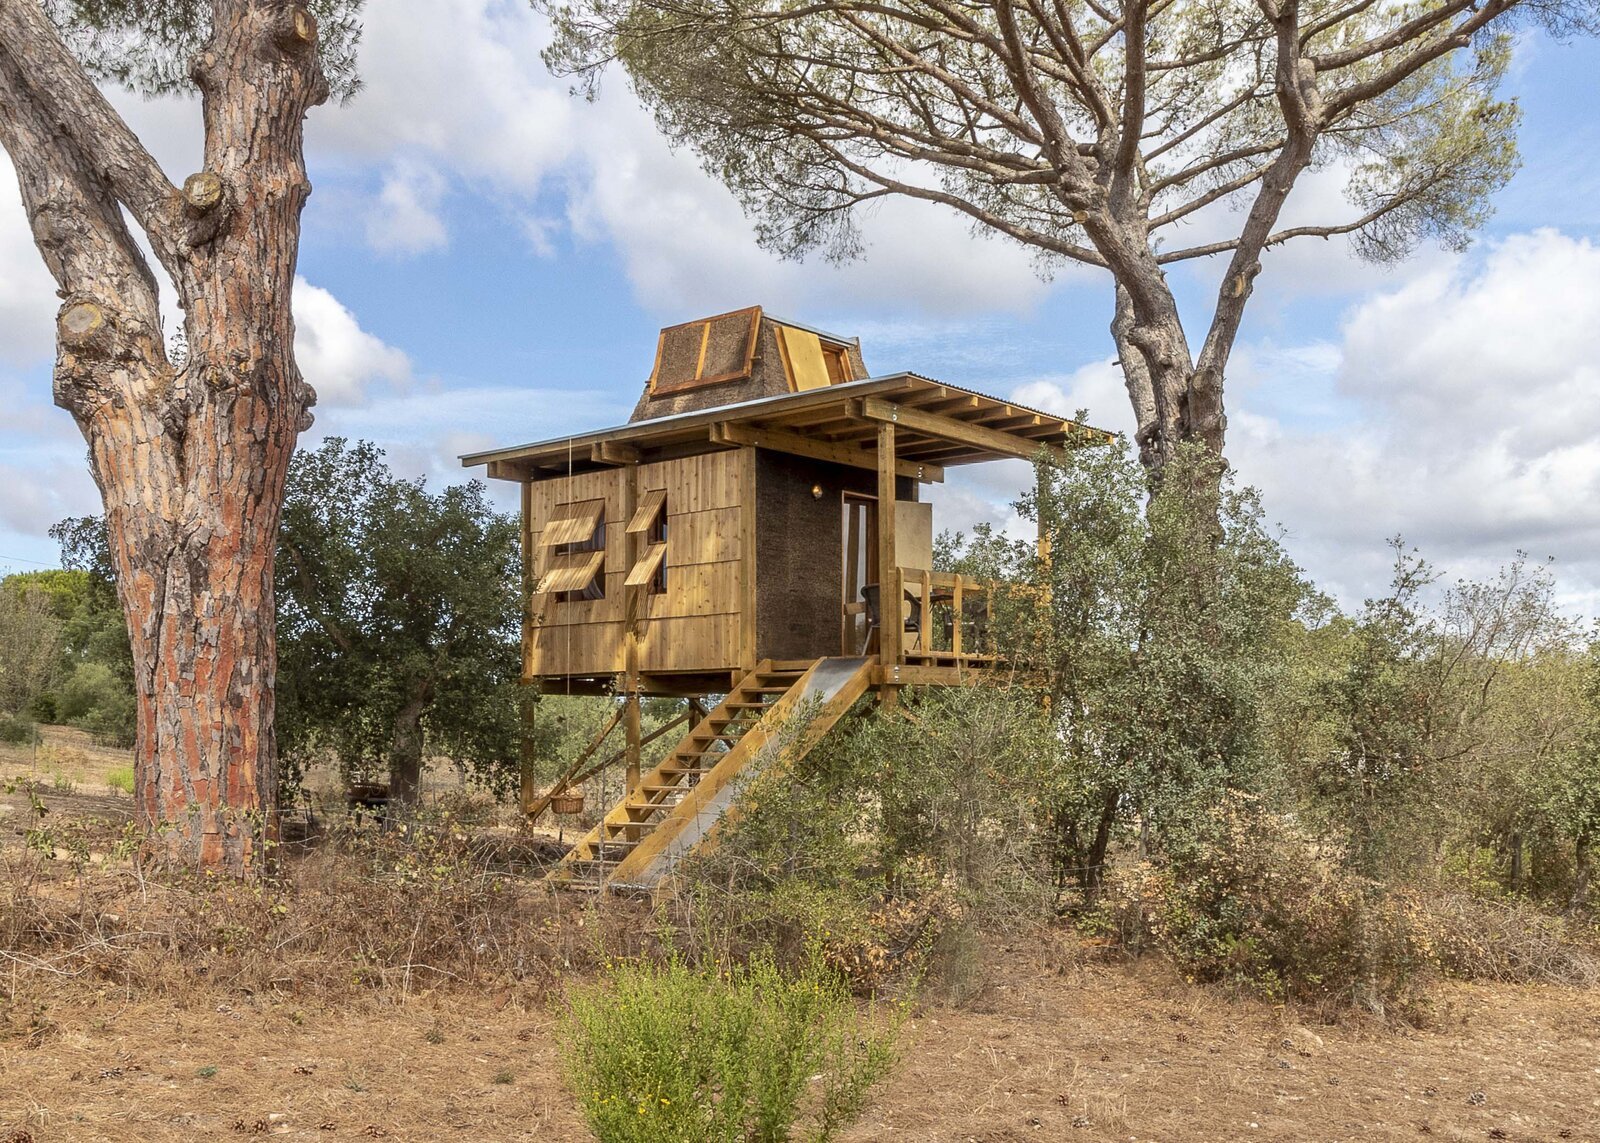 260 Square Feet of Tree House Is All a Portuguese Family Needs for the Summer